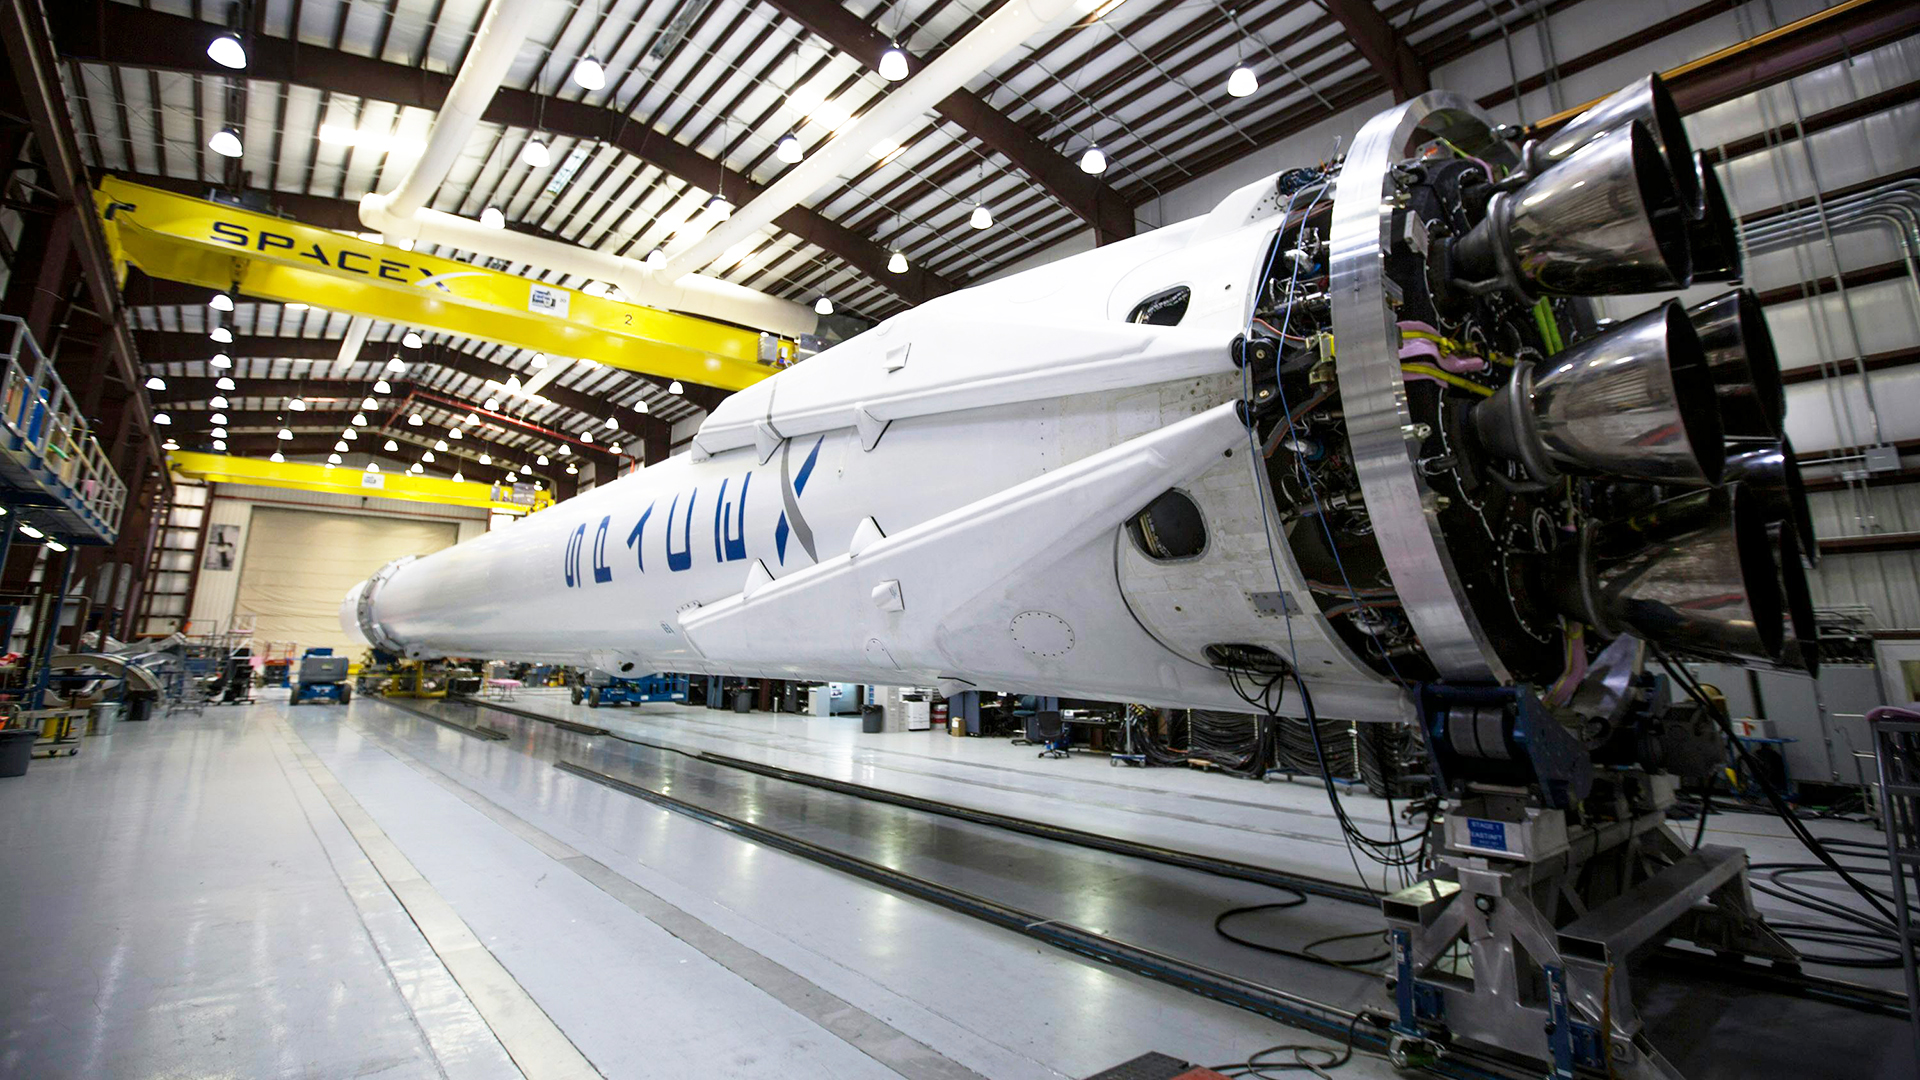 SpaceX Falcon 9 at the integration facility. Virtual background to use on Zoom, Microsoft Teams, Skype, Google Meet, WebEx or any other compatible app.